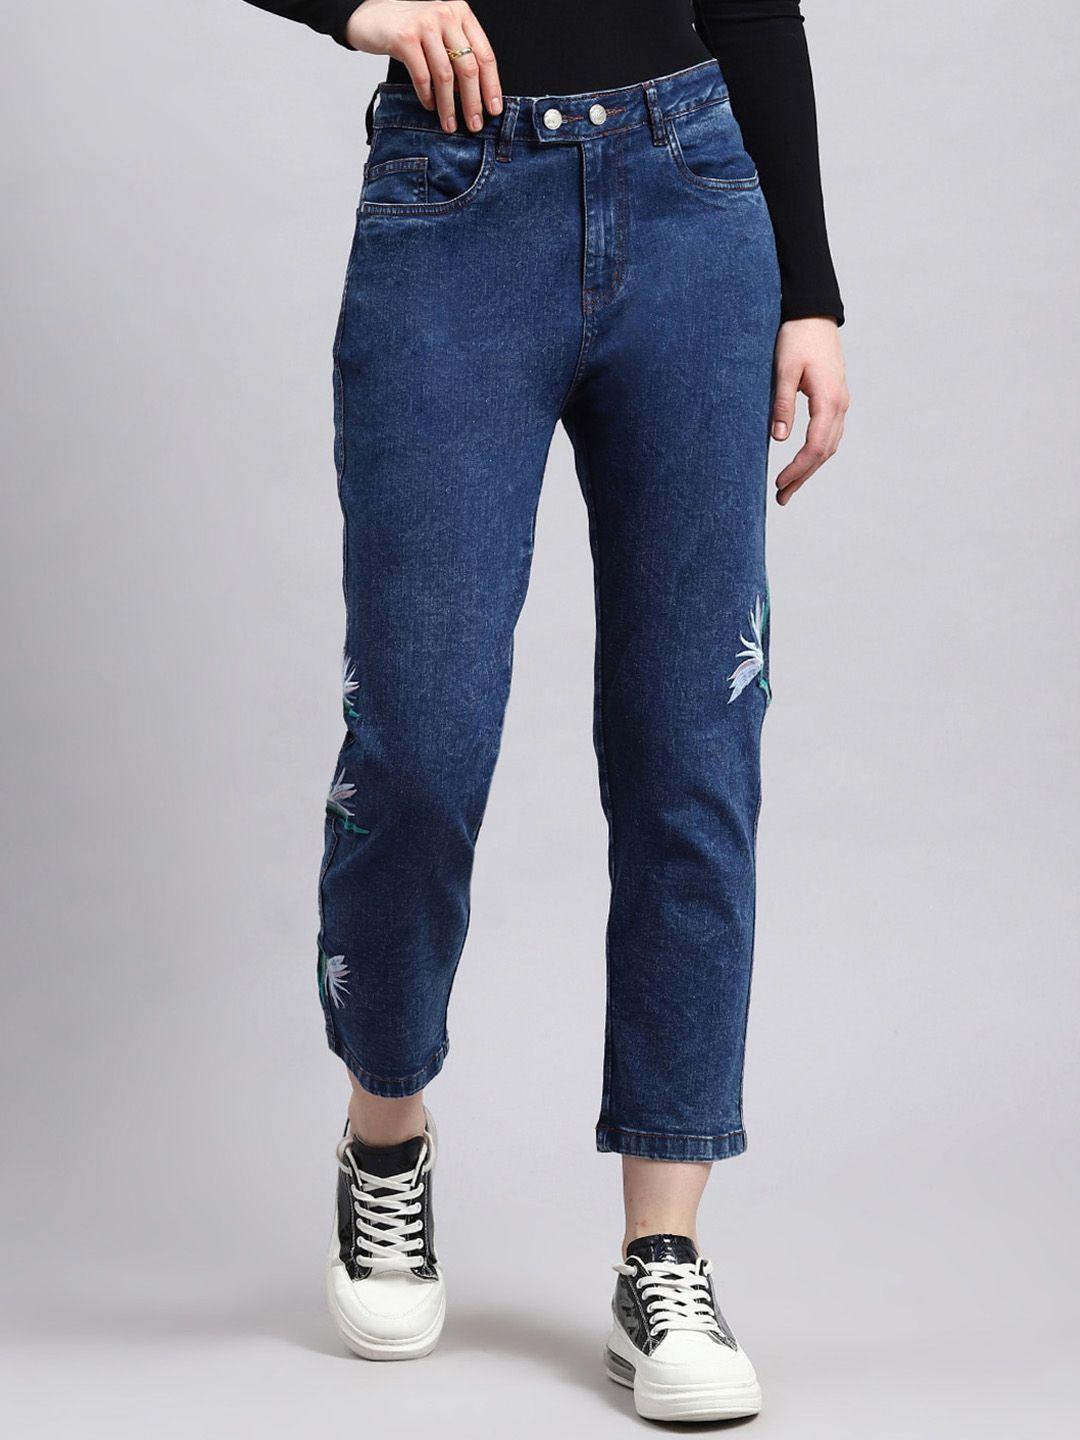 monte-carlo-women-smart-mid-rise-straight-fit-embroidered-jeans